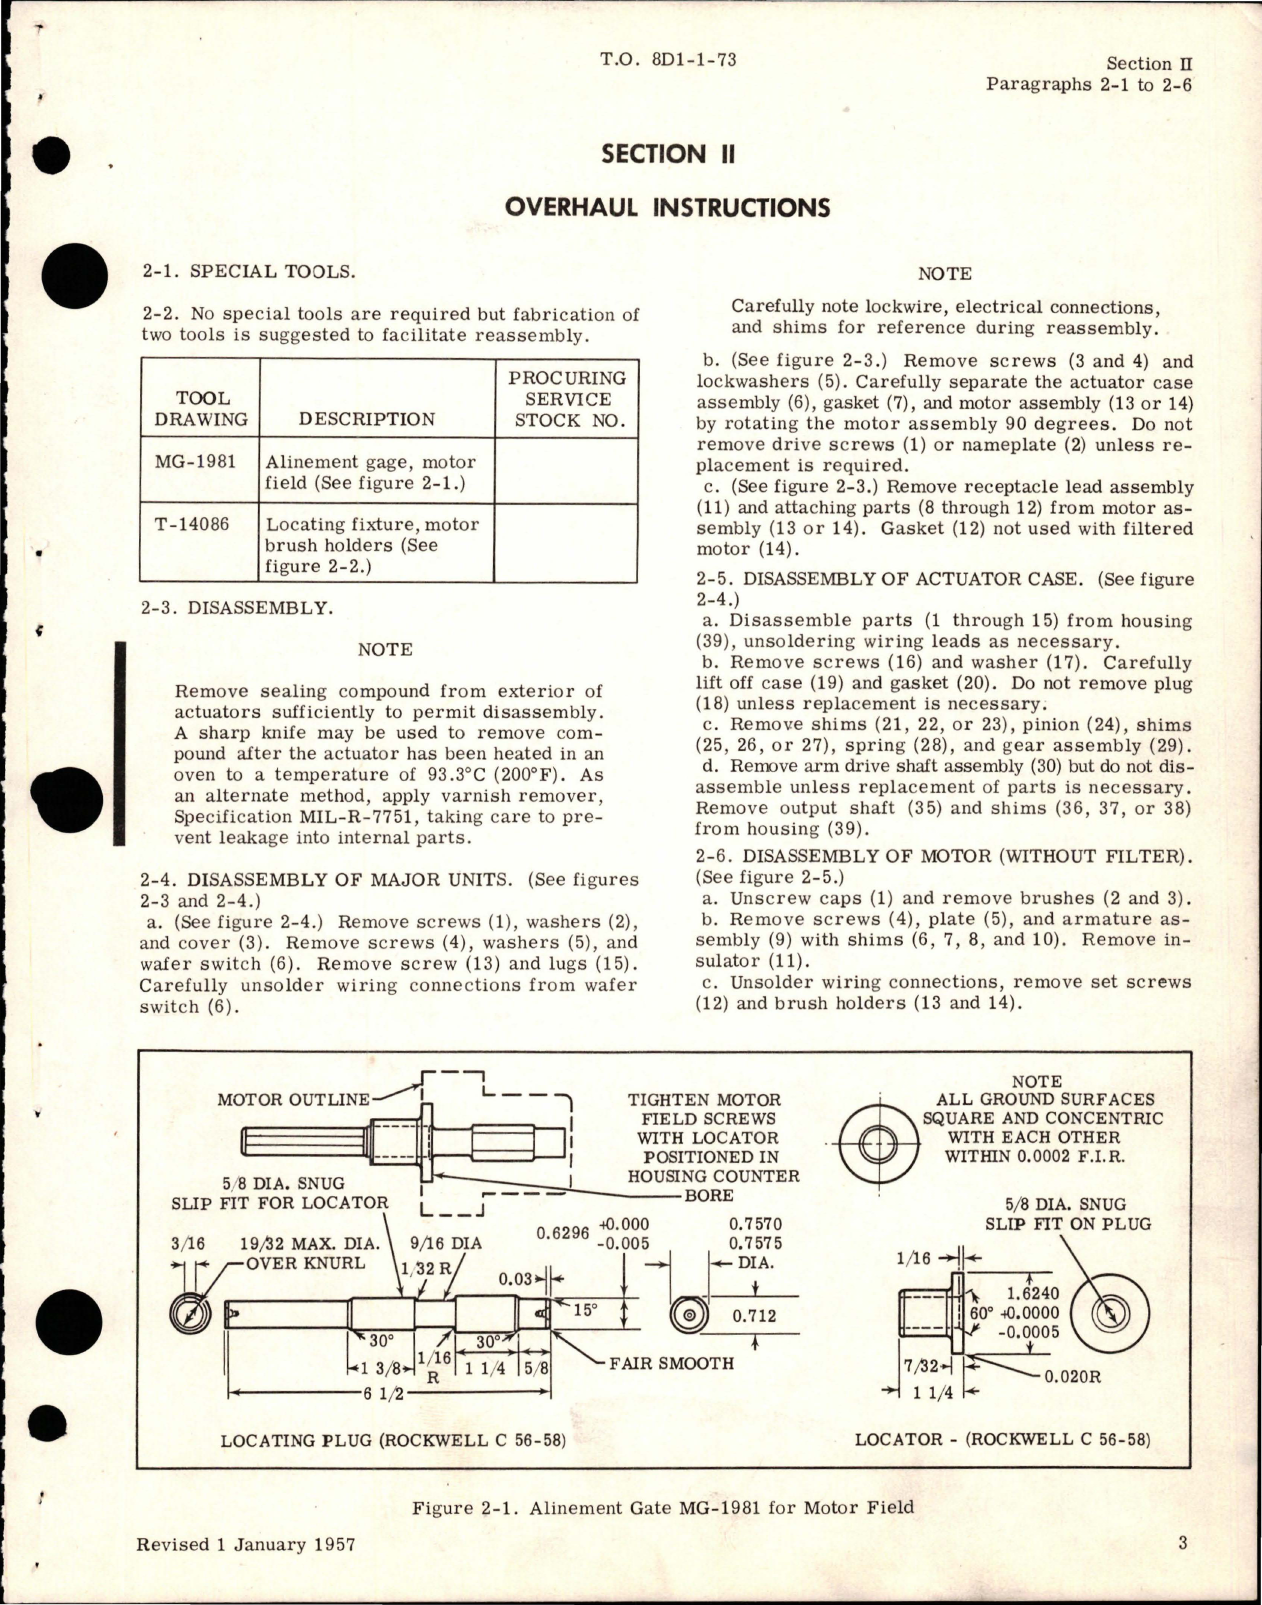 Sample page 5 from AirCorps Library document: Overhaul Instructions for Geneva-Loc Actuators - Series 108